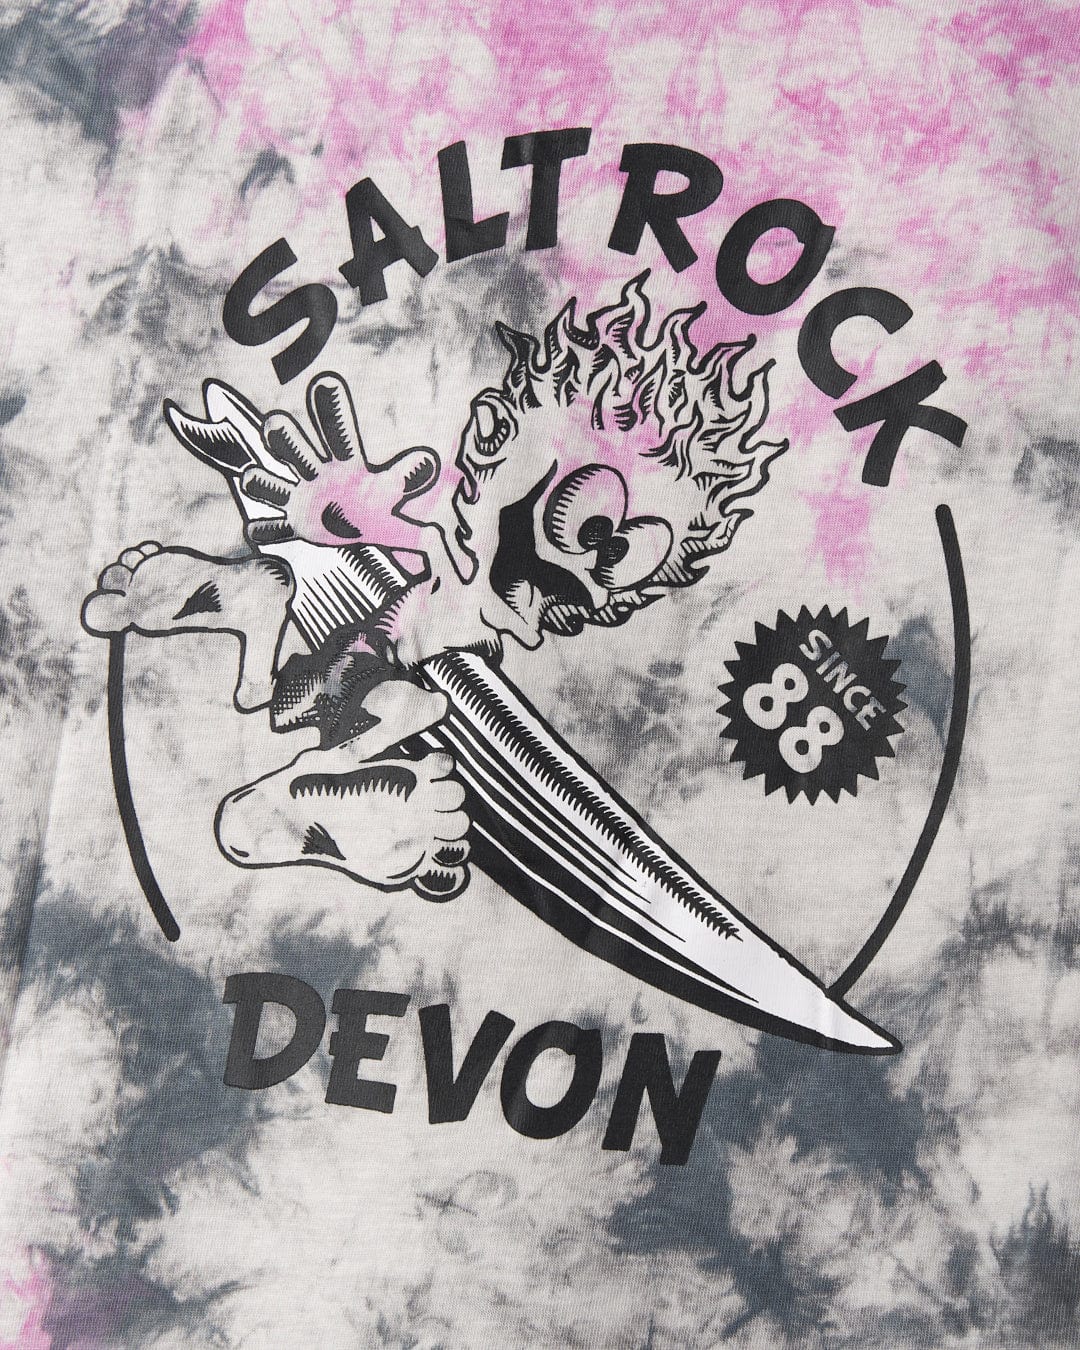 Graphic print on a tie-dye fabric featuring the word "Saltrock" alongside an illustration of a sword and flame, with the text "Devon" and "since 88" below. Made